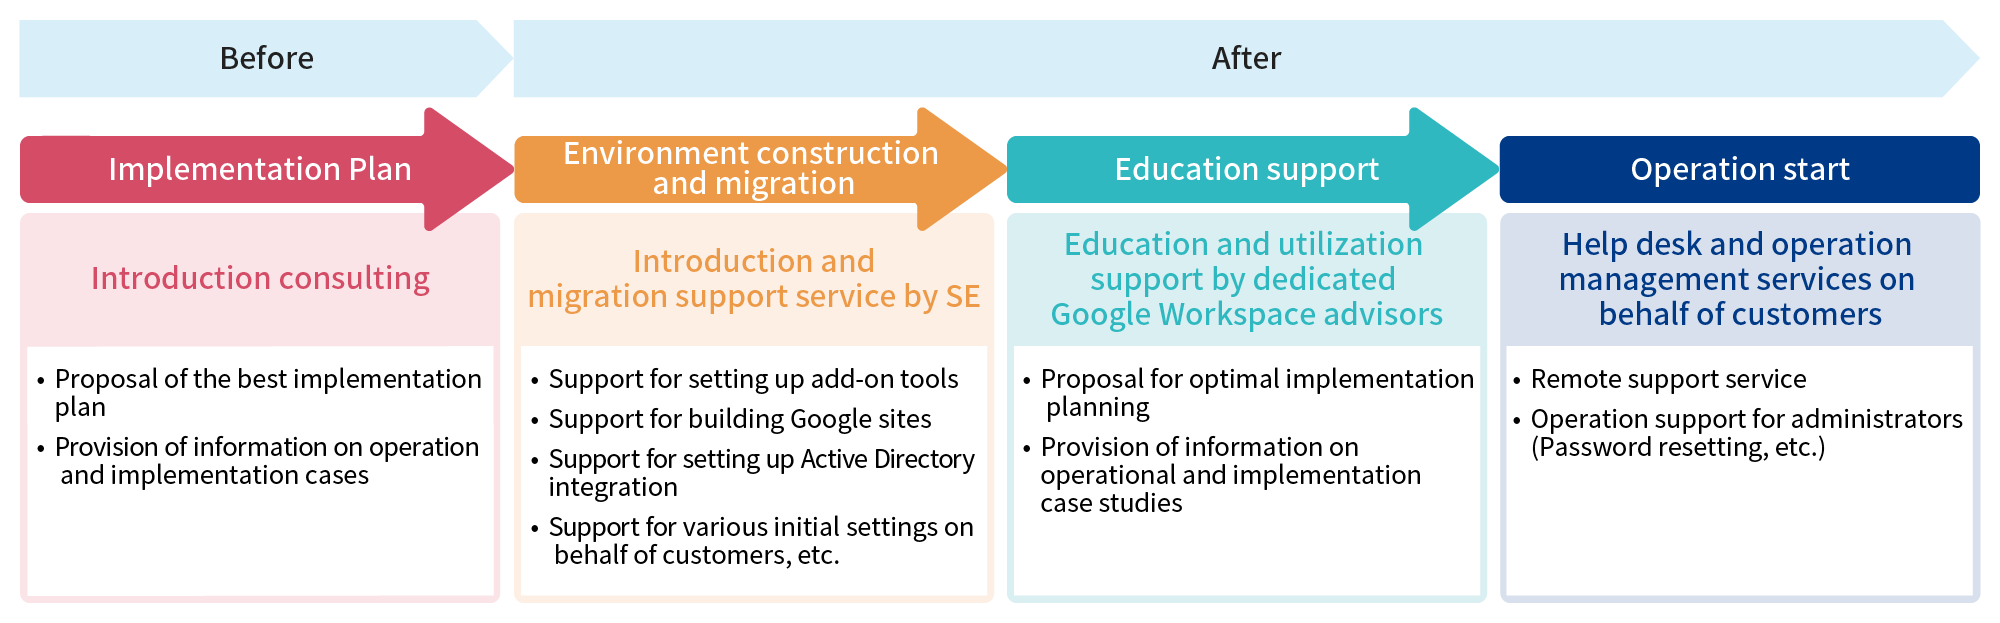 One-stop support from pre-implementation plan to post-implementation environment construction and migration, education support, and operational launch